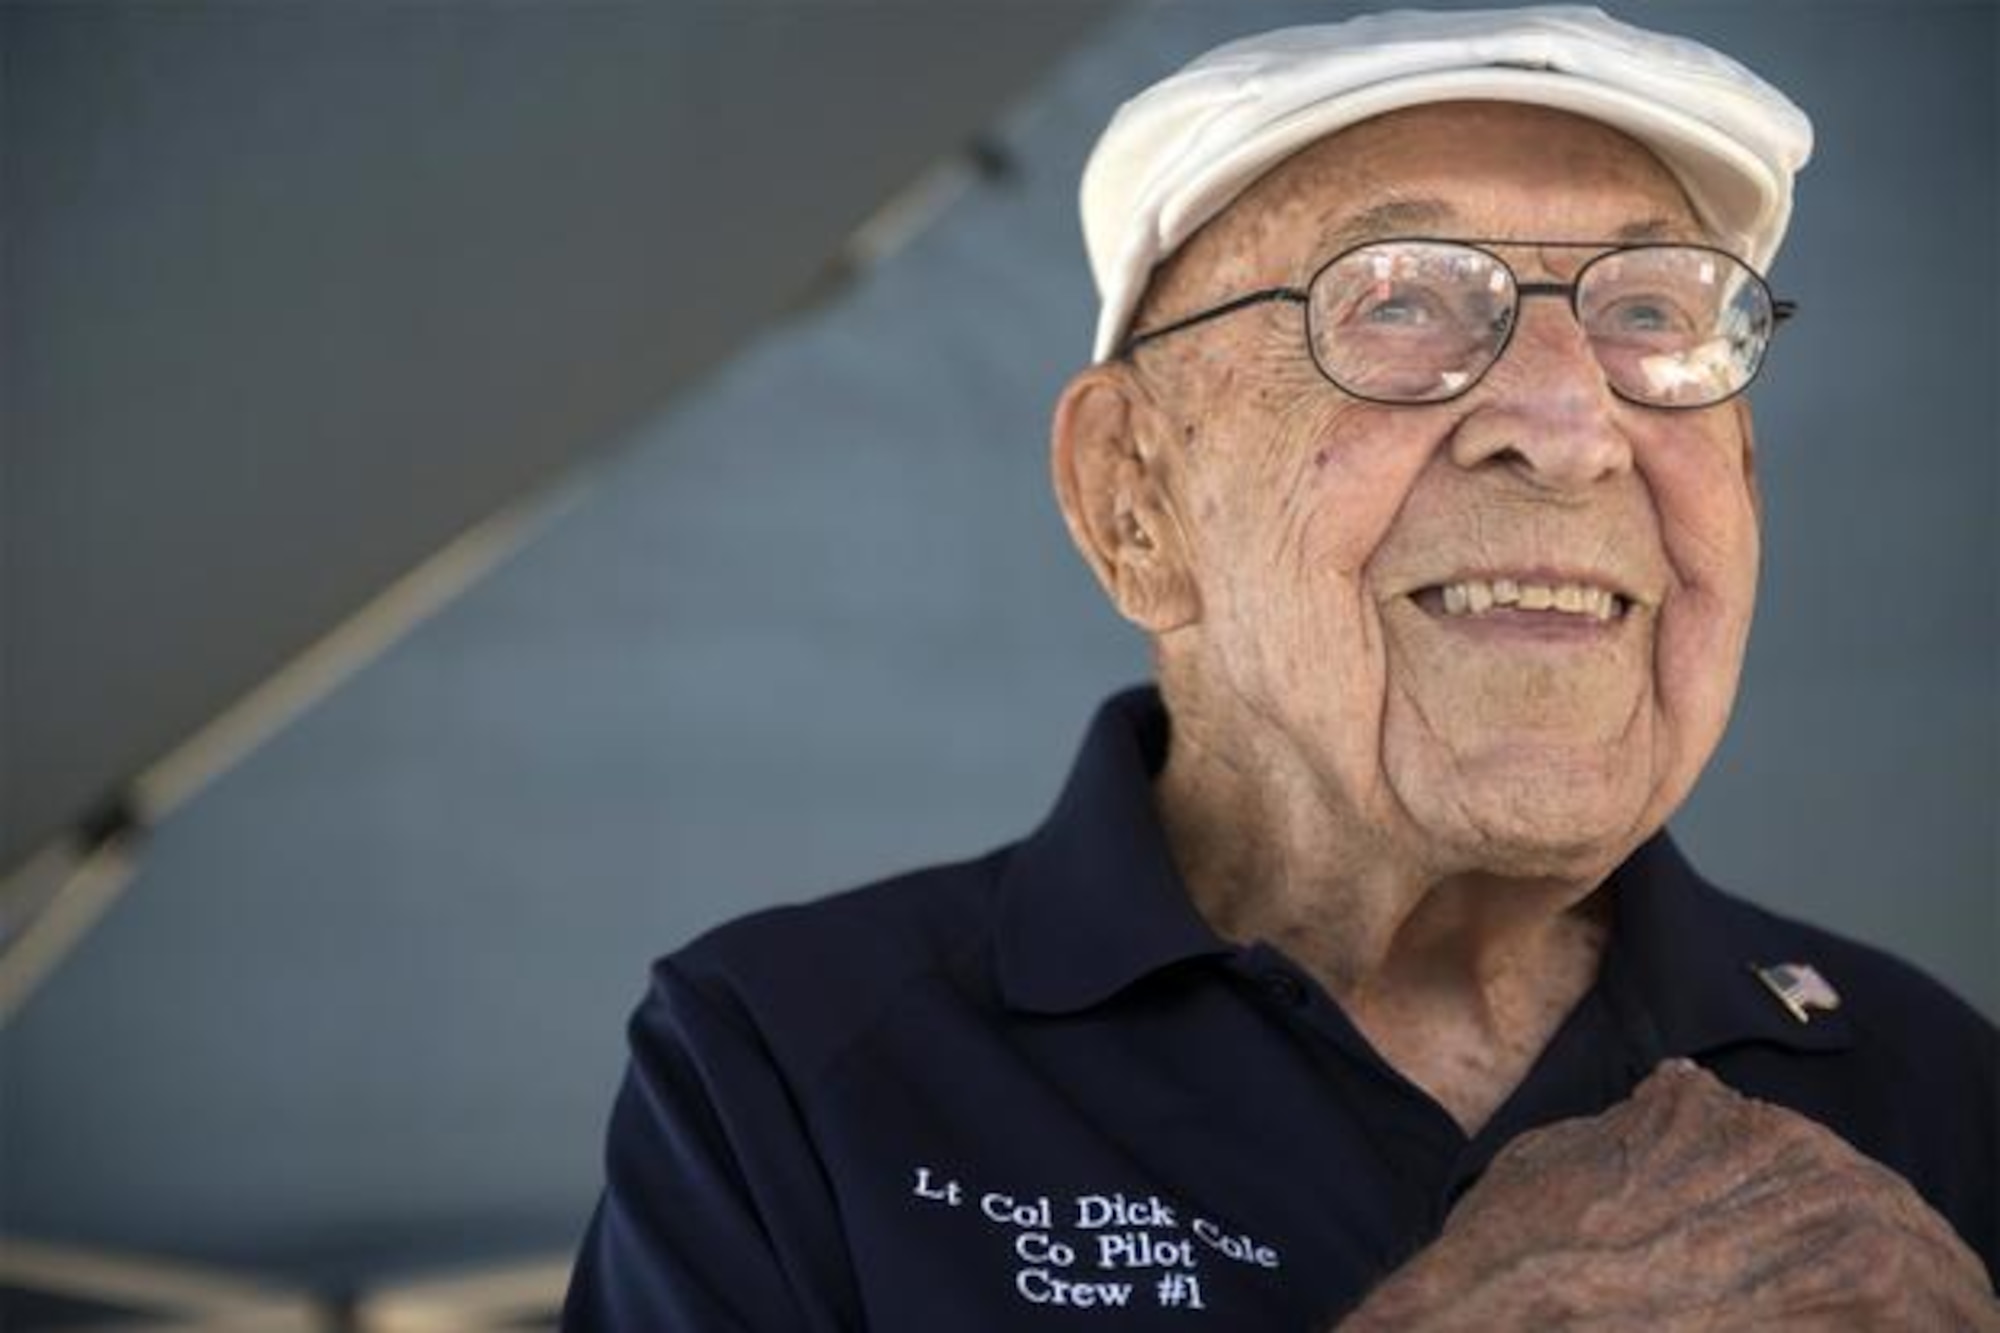 Retired Lt. Col. Richard E. Cole, co-pilot to Jimmy Doolittle during the Doolittle Raid, smiles as he honors the U.S. flag during the singing of the National Anthem at an airshow in Burnet, Texas. Cole passed away April 8, 2019, and will be honored during a memorial service at Joint Base San Antonio-Randolph, Texas, on the 77th Anniversary of the Doolittle Raid, April 18, 2019. For more information, see the bottom of the article “77 Years of Courage”. (U.S. Air Force photo by Staff Sgt. Vernon Young Jr.)